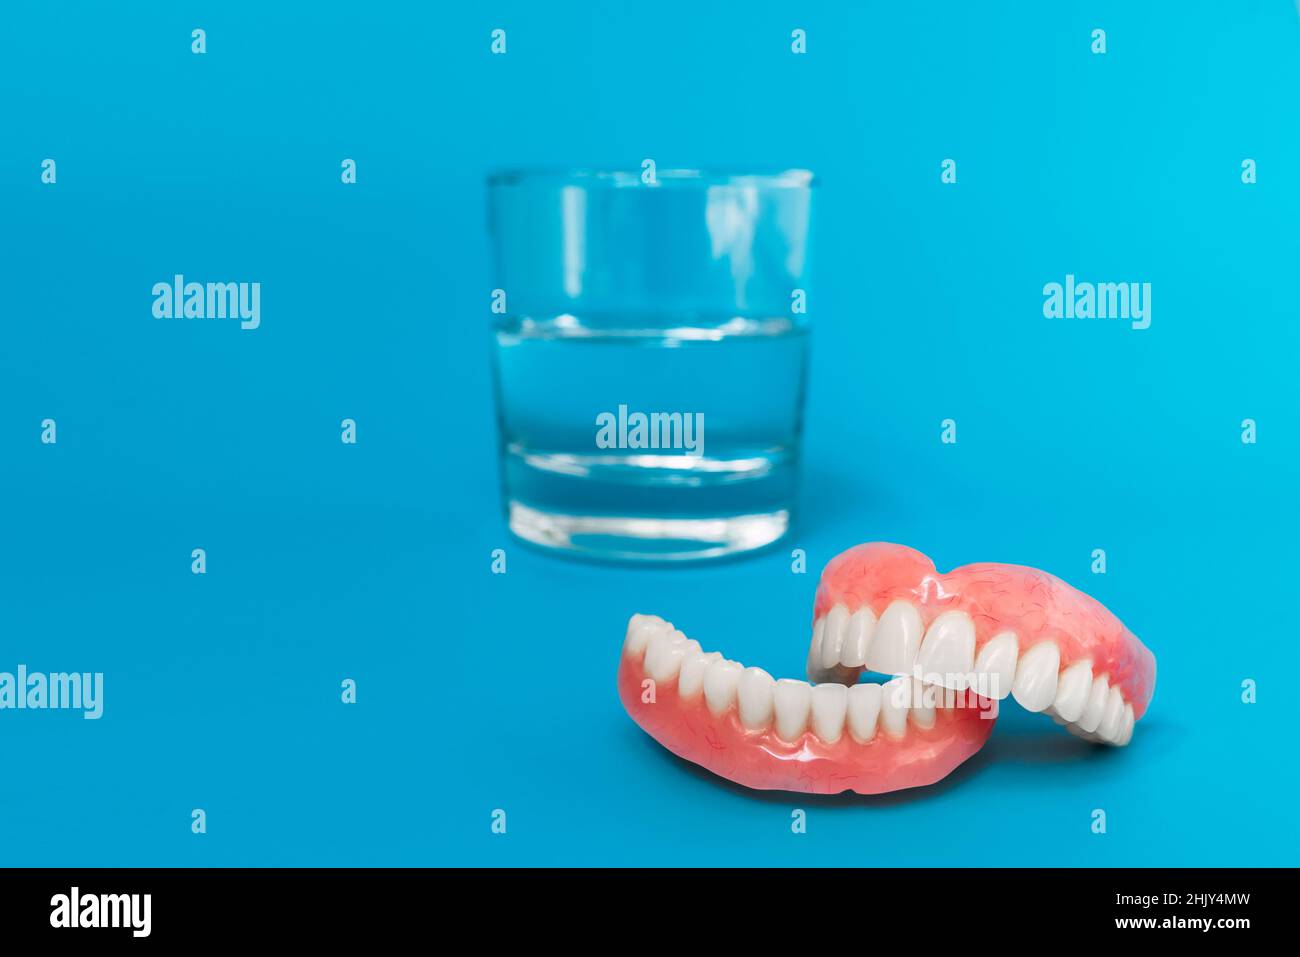 Full removable plastic denture of the jaws. A set of dentures on a blue background. Two acrylic dentures. Upper and lower jaws with fake teeth. Dentur Stock Photo